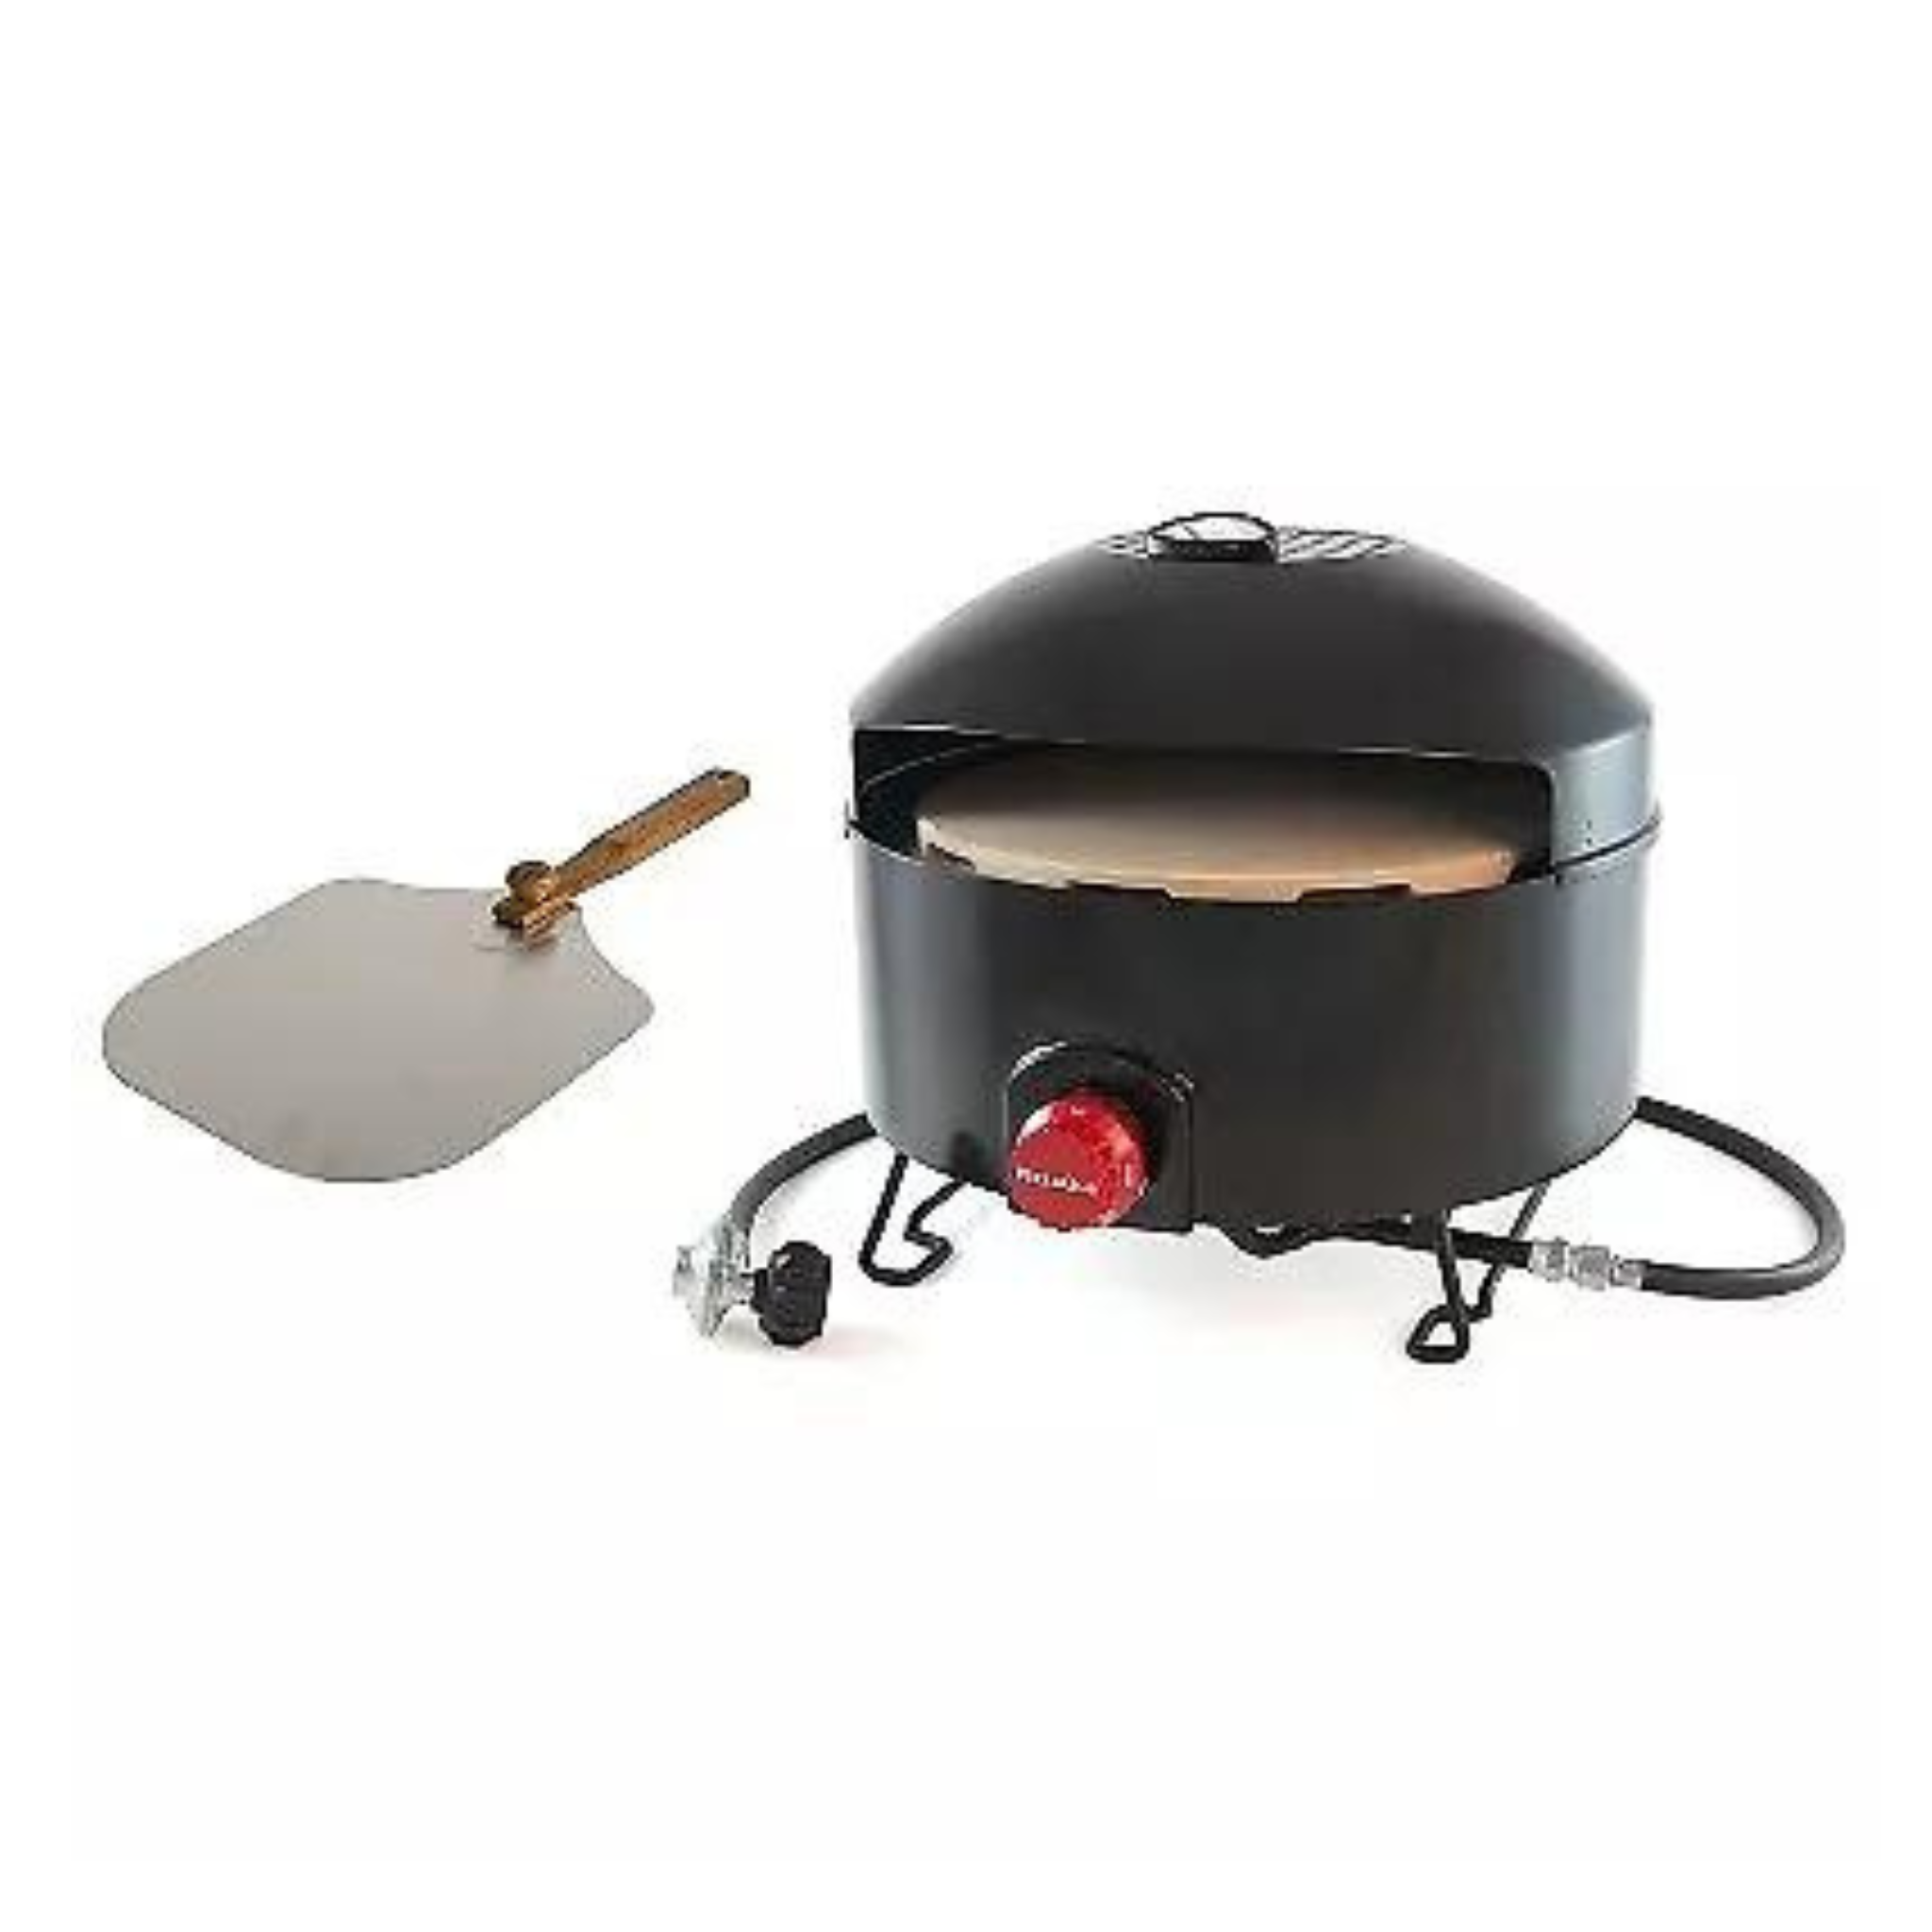 Pizzacraft PC6500 PizzaQue Portable Outdoor Pizza Oven